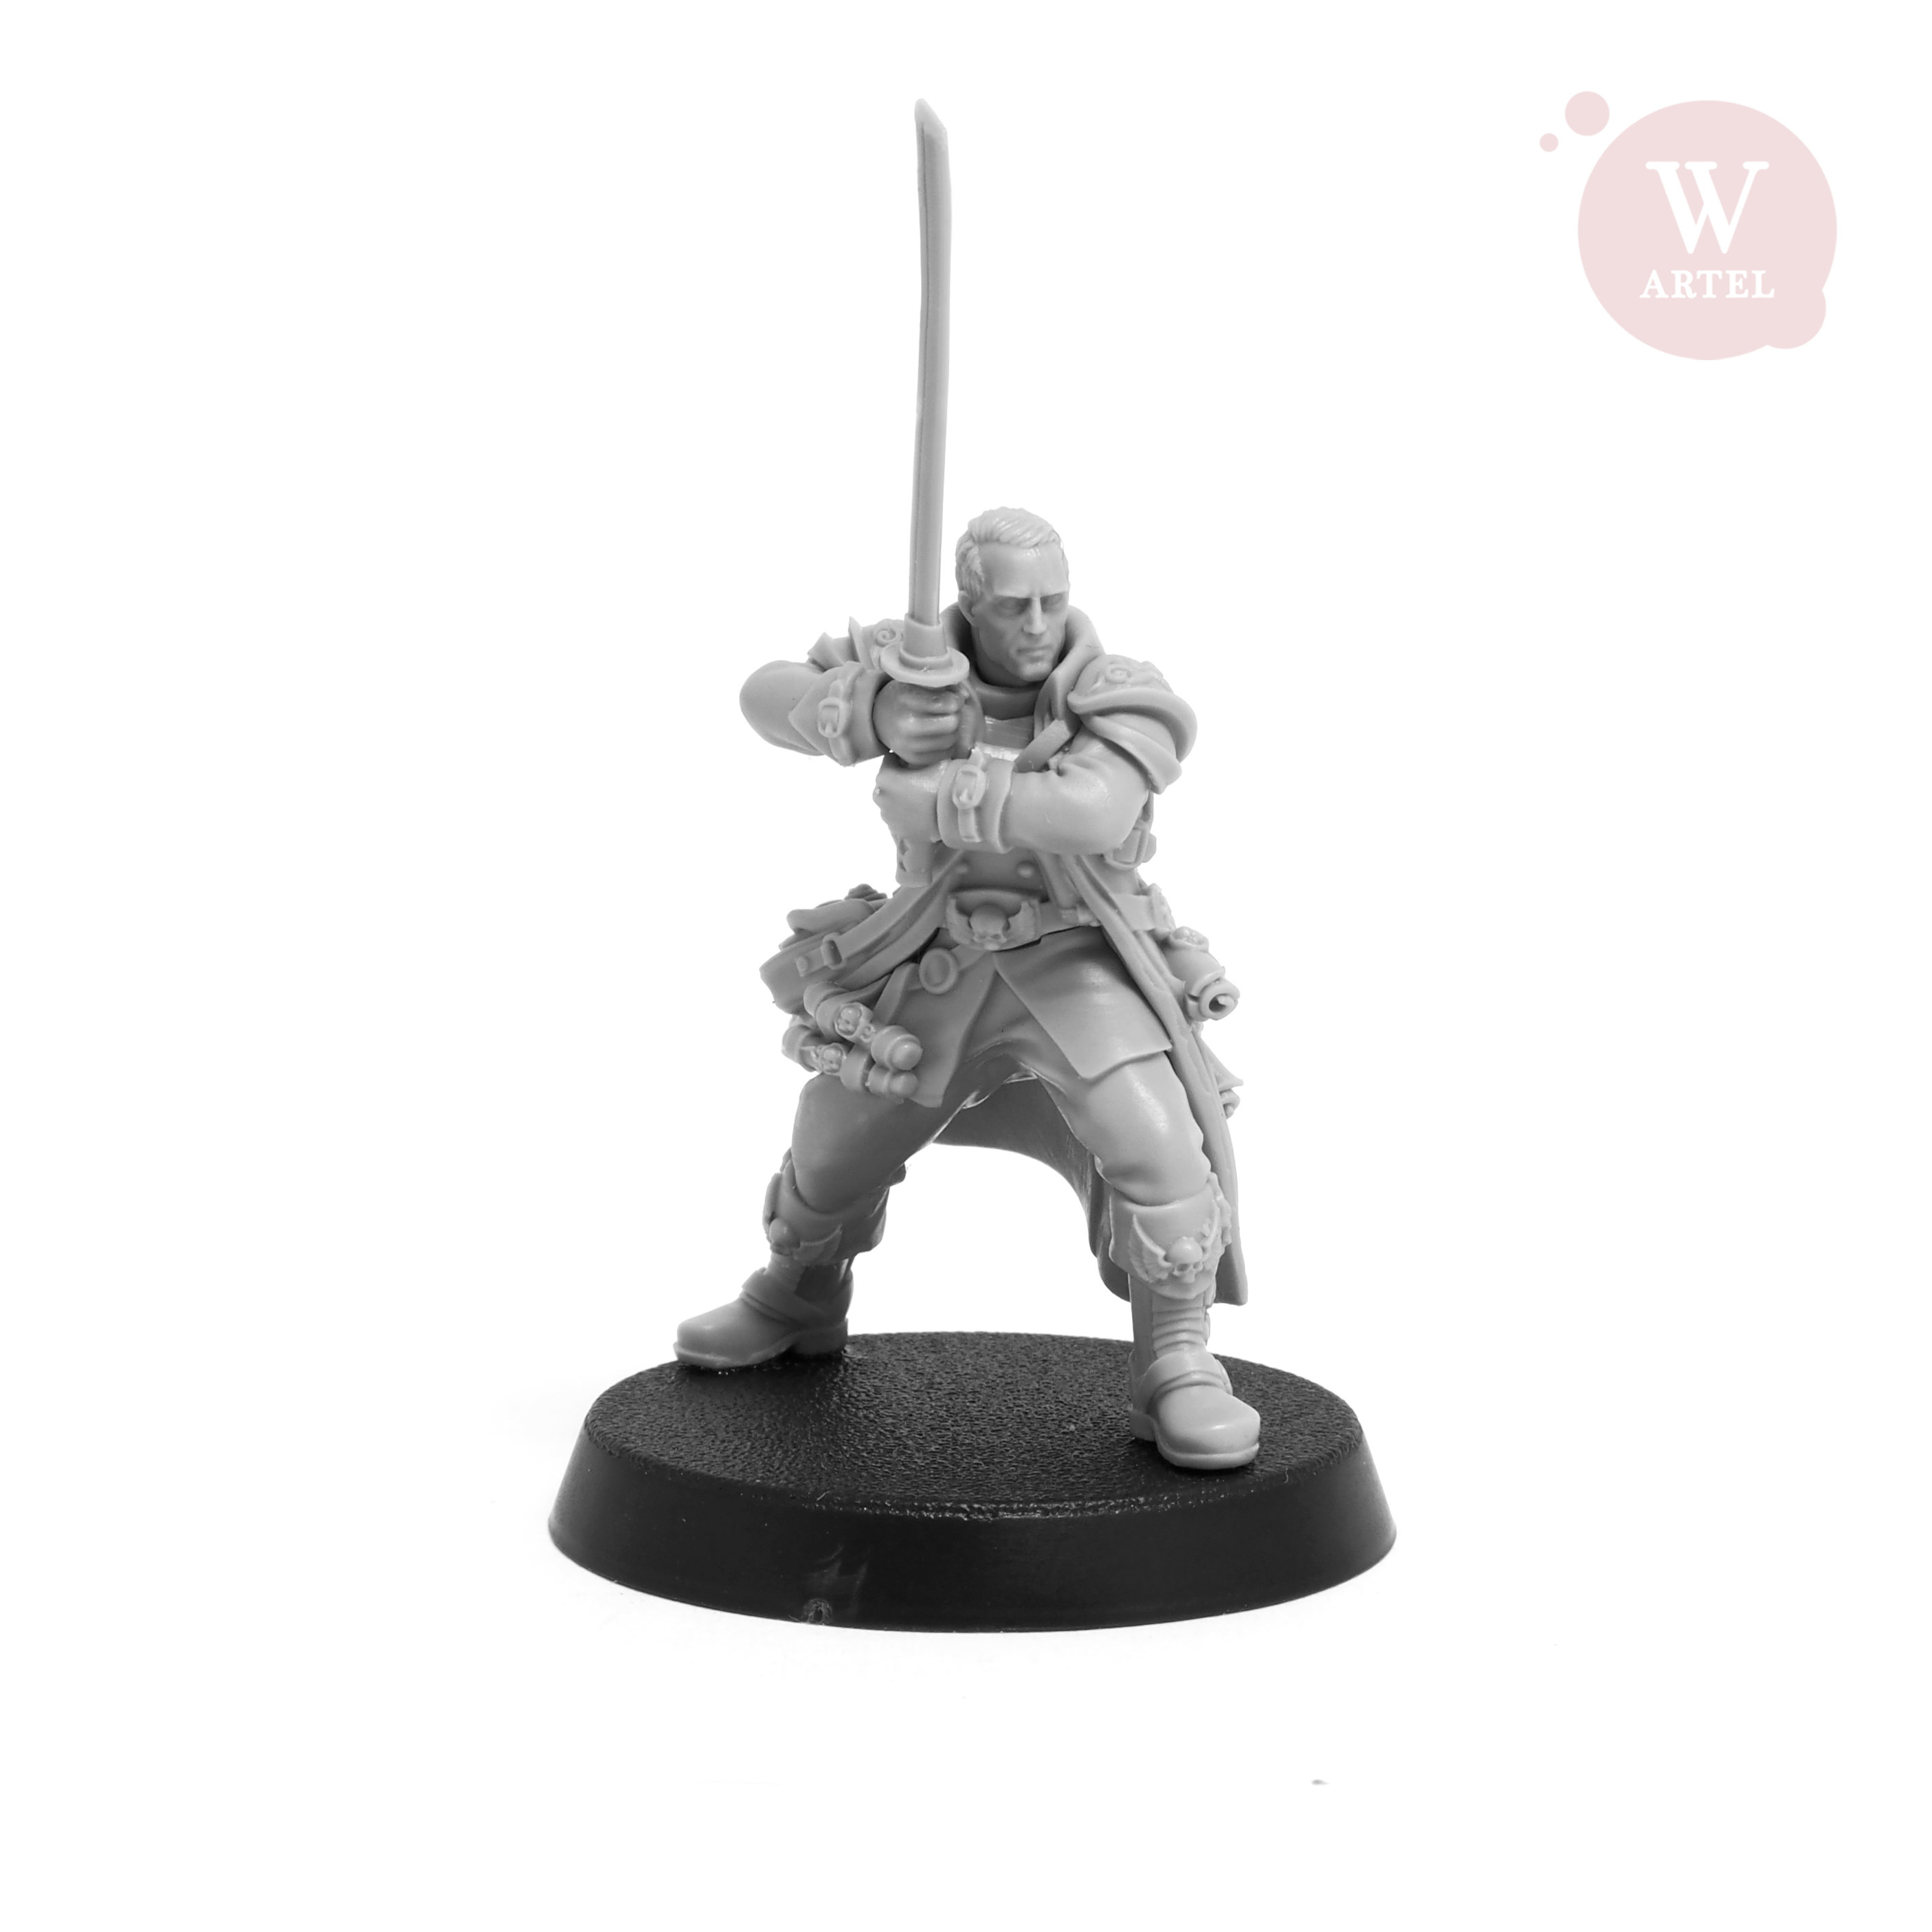 28mm wargaming and collectible miniature The Chastener by /"W/" Artel